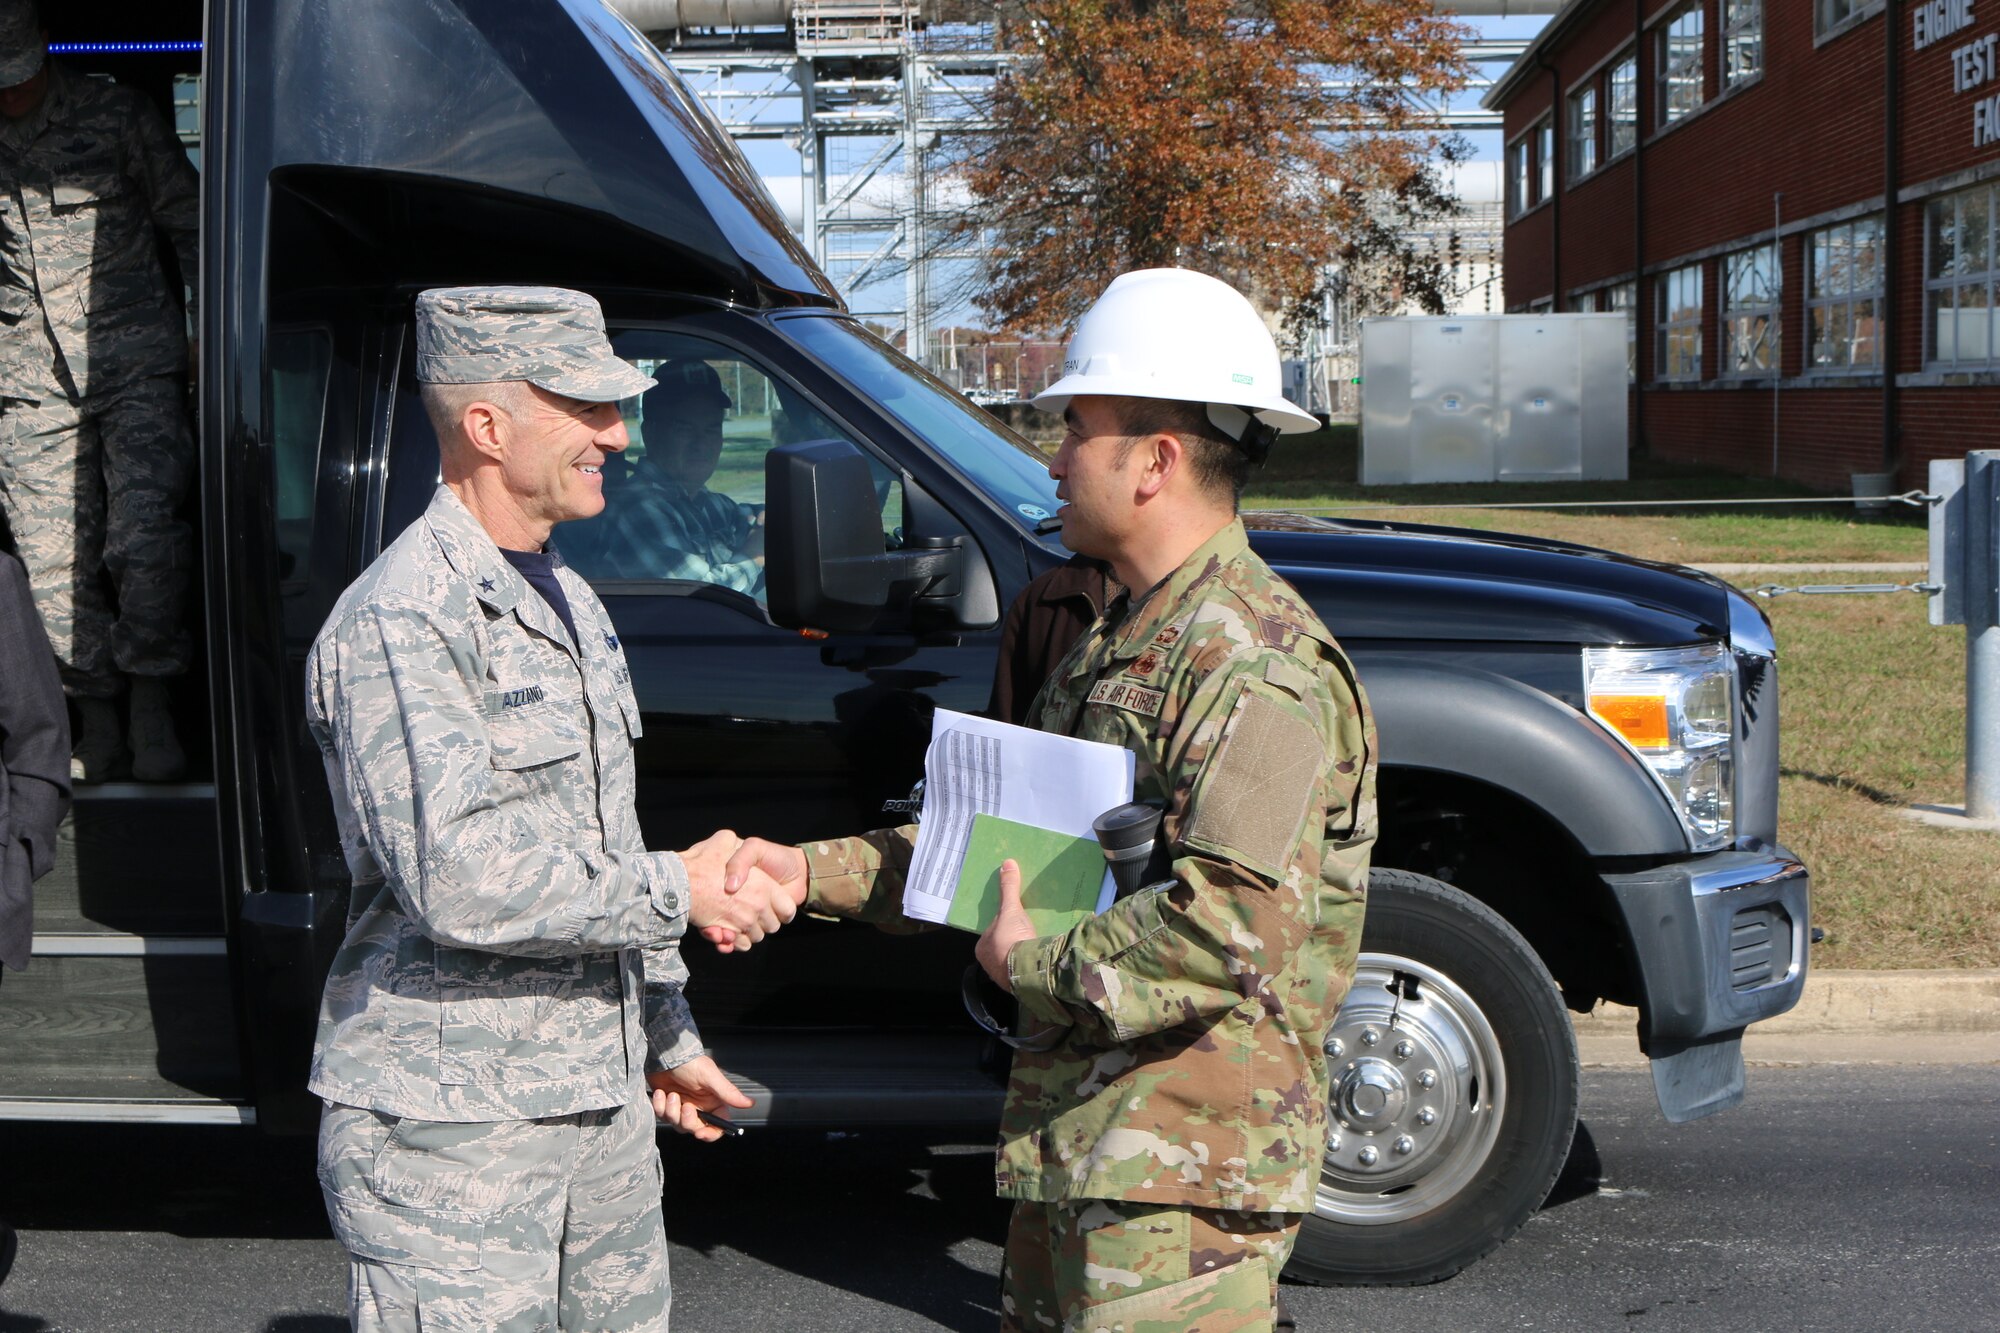 Brig. Gen. Christopher Azzano, commander of the Air Force Test Center, left, is greeted by AEDC Test Systems Sustainment Chief Col. John Tran outside of the Engine Test Facility at Arnold Air Force Base. Azzano and other AFTC leadership visited Arnold Air Force Base in mid-November to take part in the 2018 AFTC Strategic Offsite, Azzano’s first offsite since assuming the role of AFTC commander in August. (U.S. Air Force photo by Brad Hicks) (This image was altered by obscuring badges for security purposes)